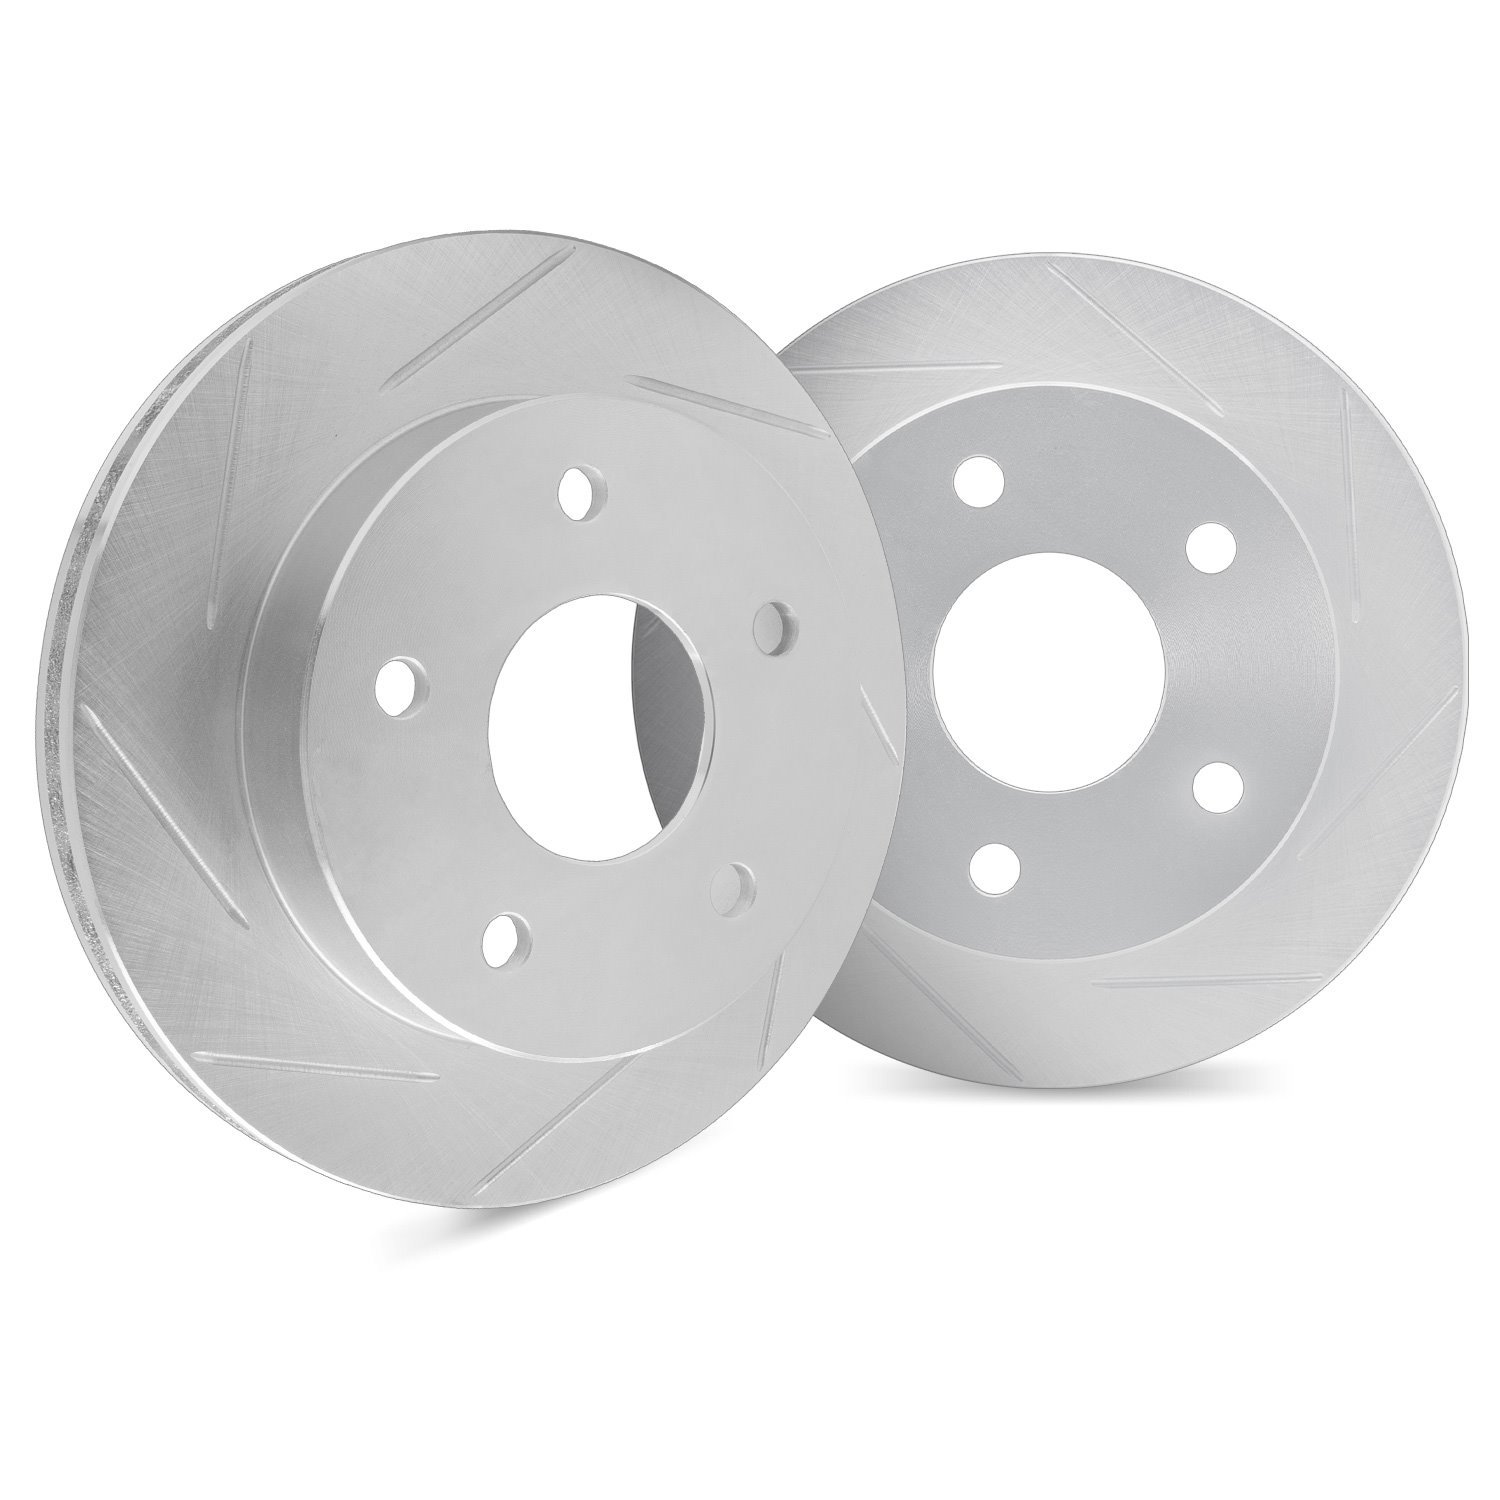 5002-31089 Slotted Brake Rotors [Silver], Fits Select Multiple Makes/Models, Position: Rear